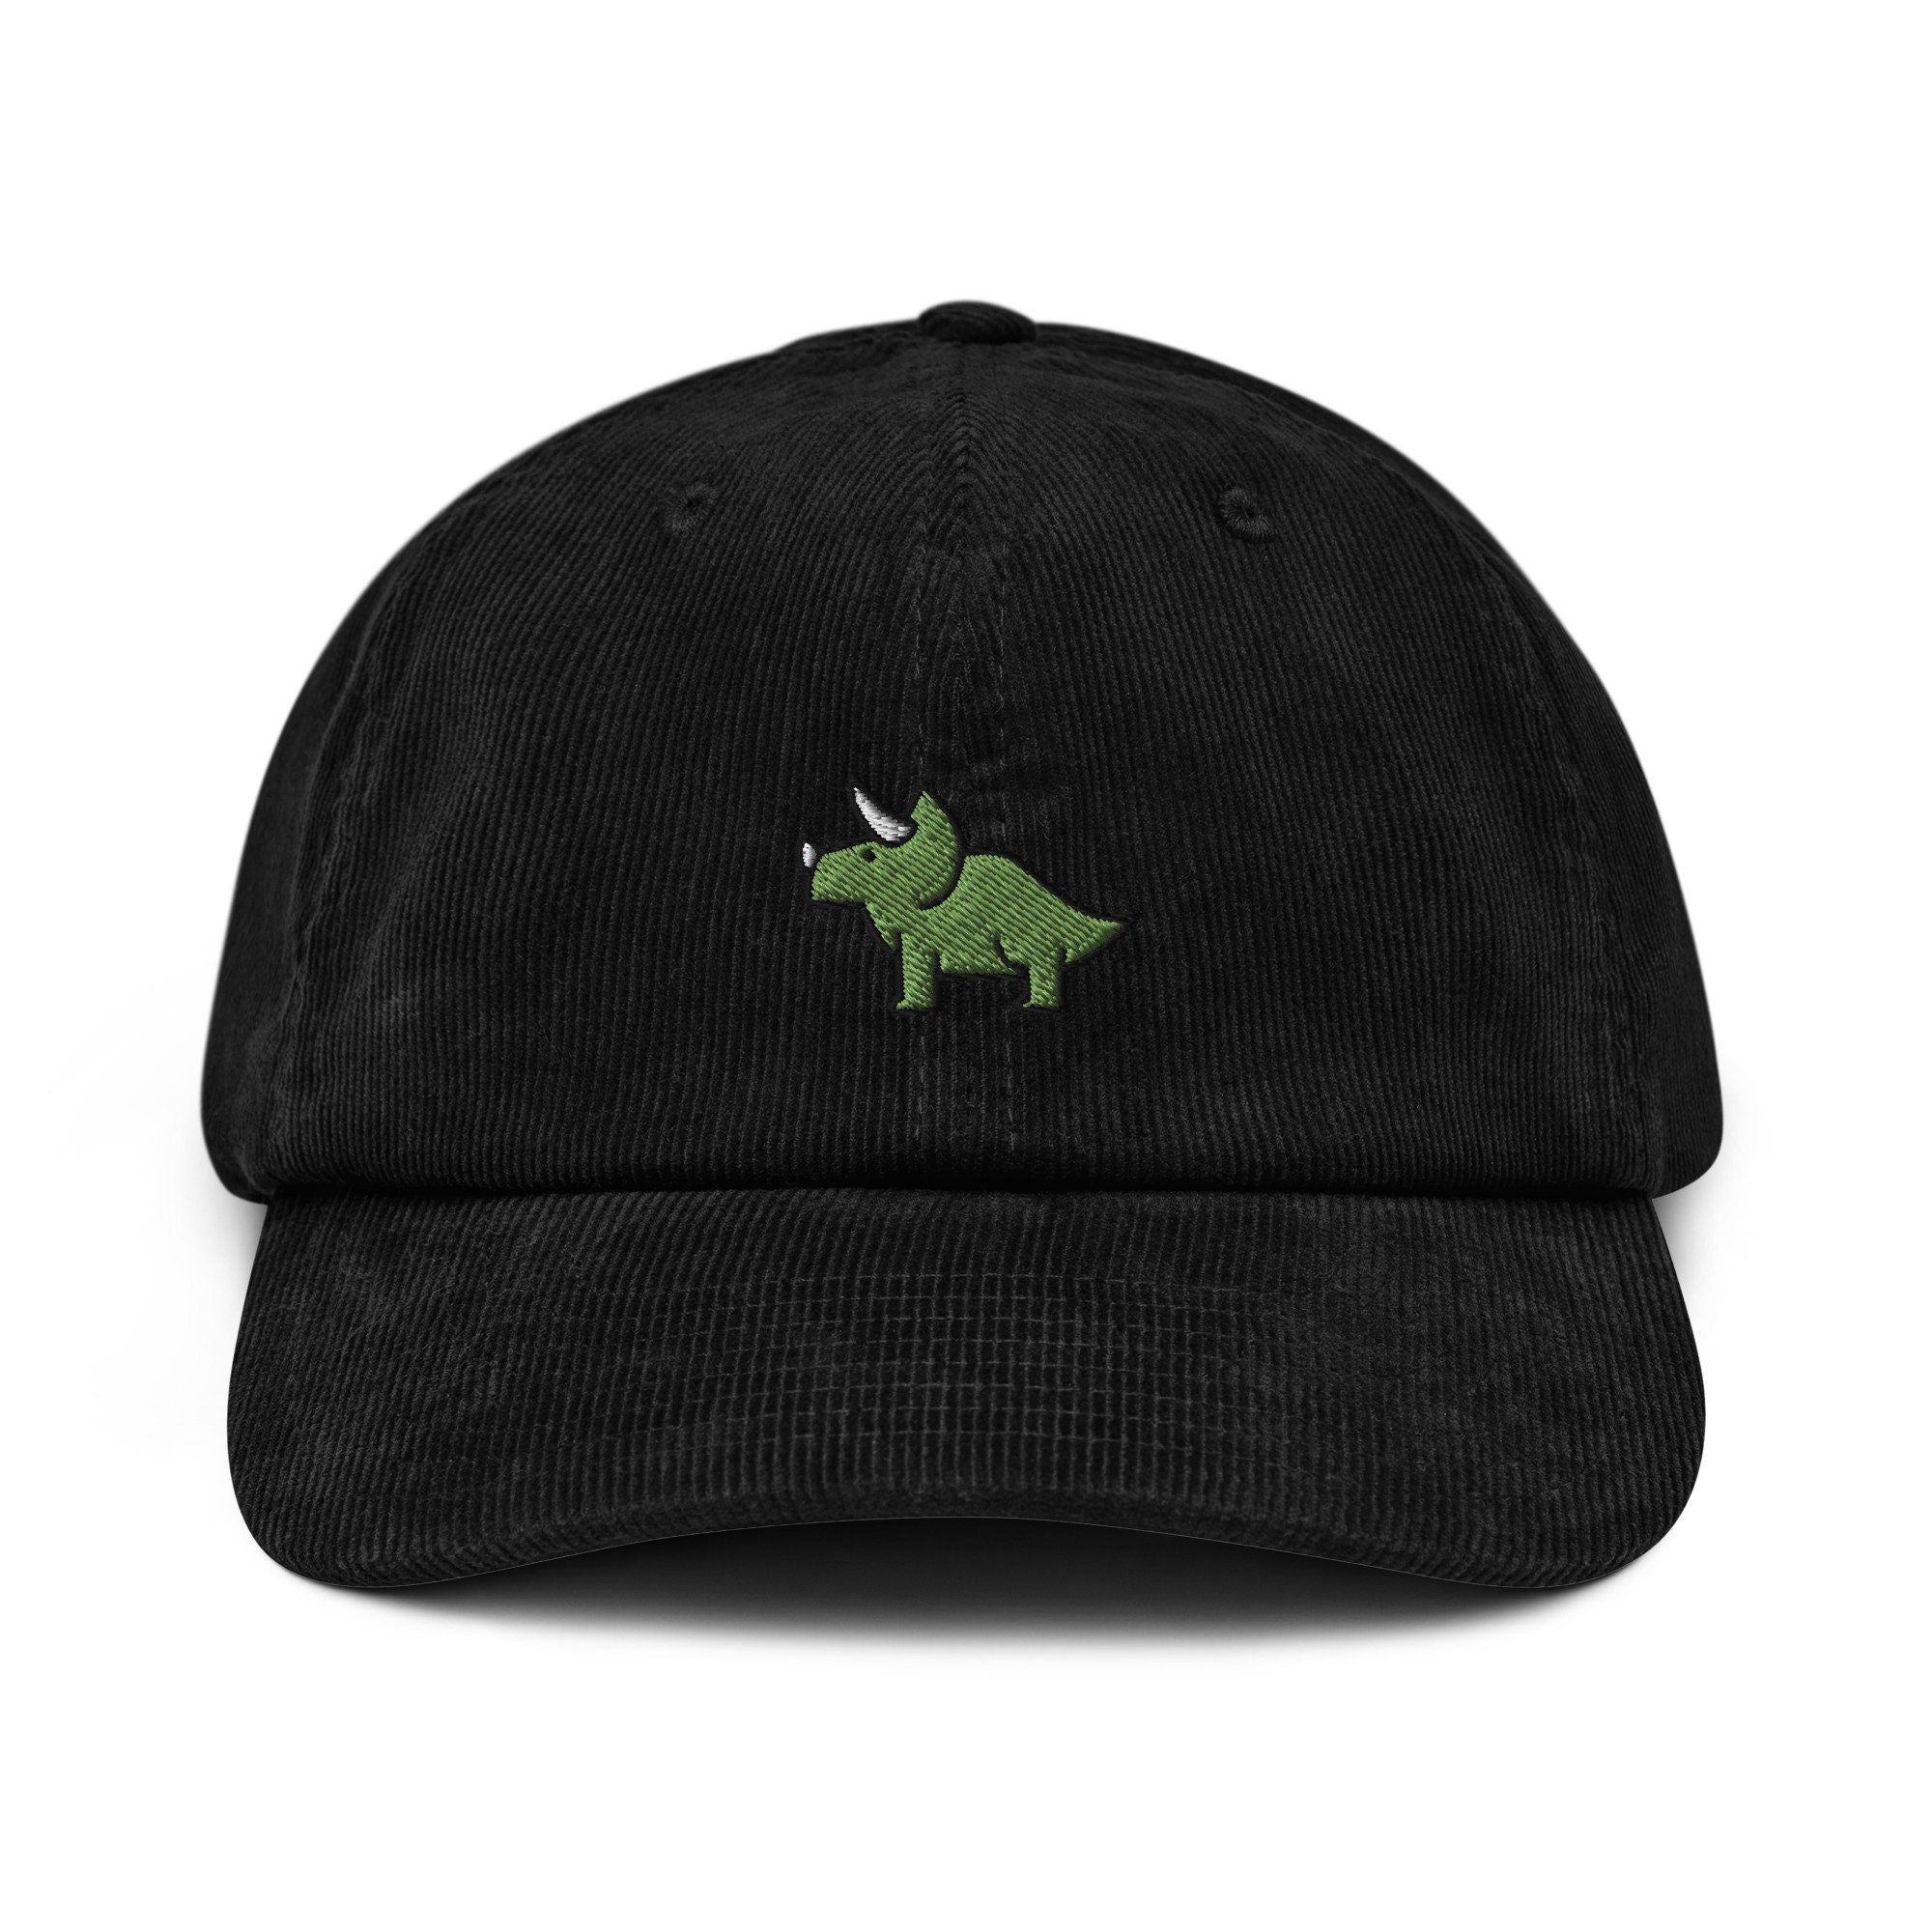 Triceratops Corduroy Hat, Handmade Embroidered Corduroy Dad Cap - Multiple Colors